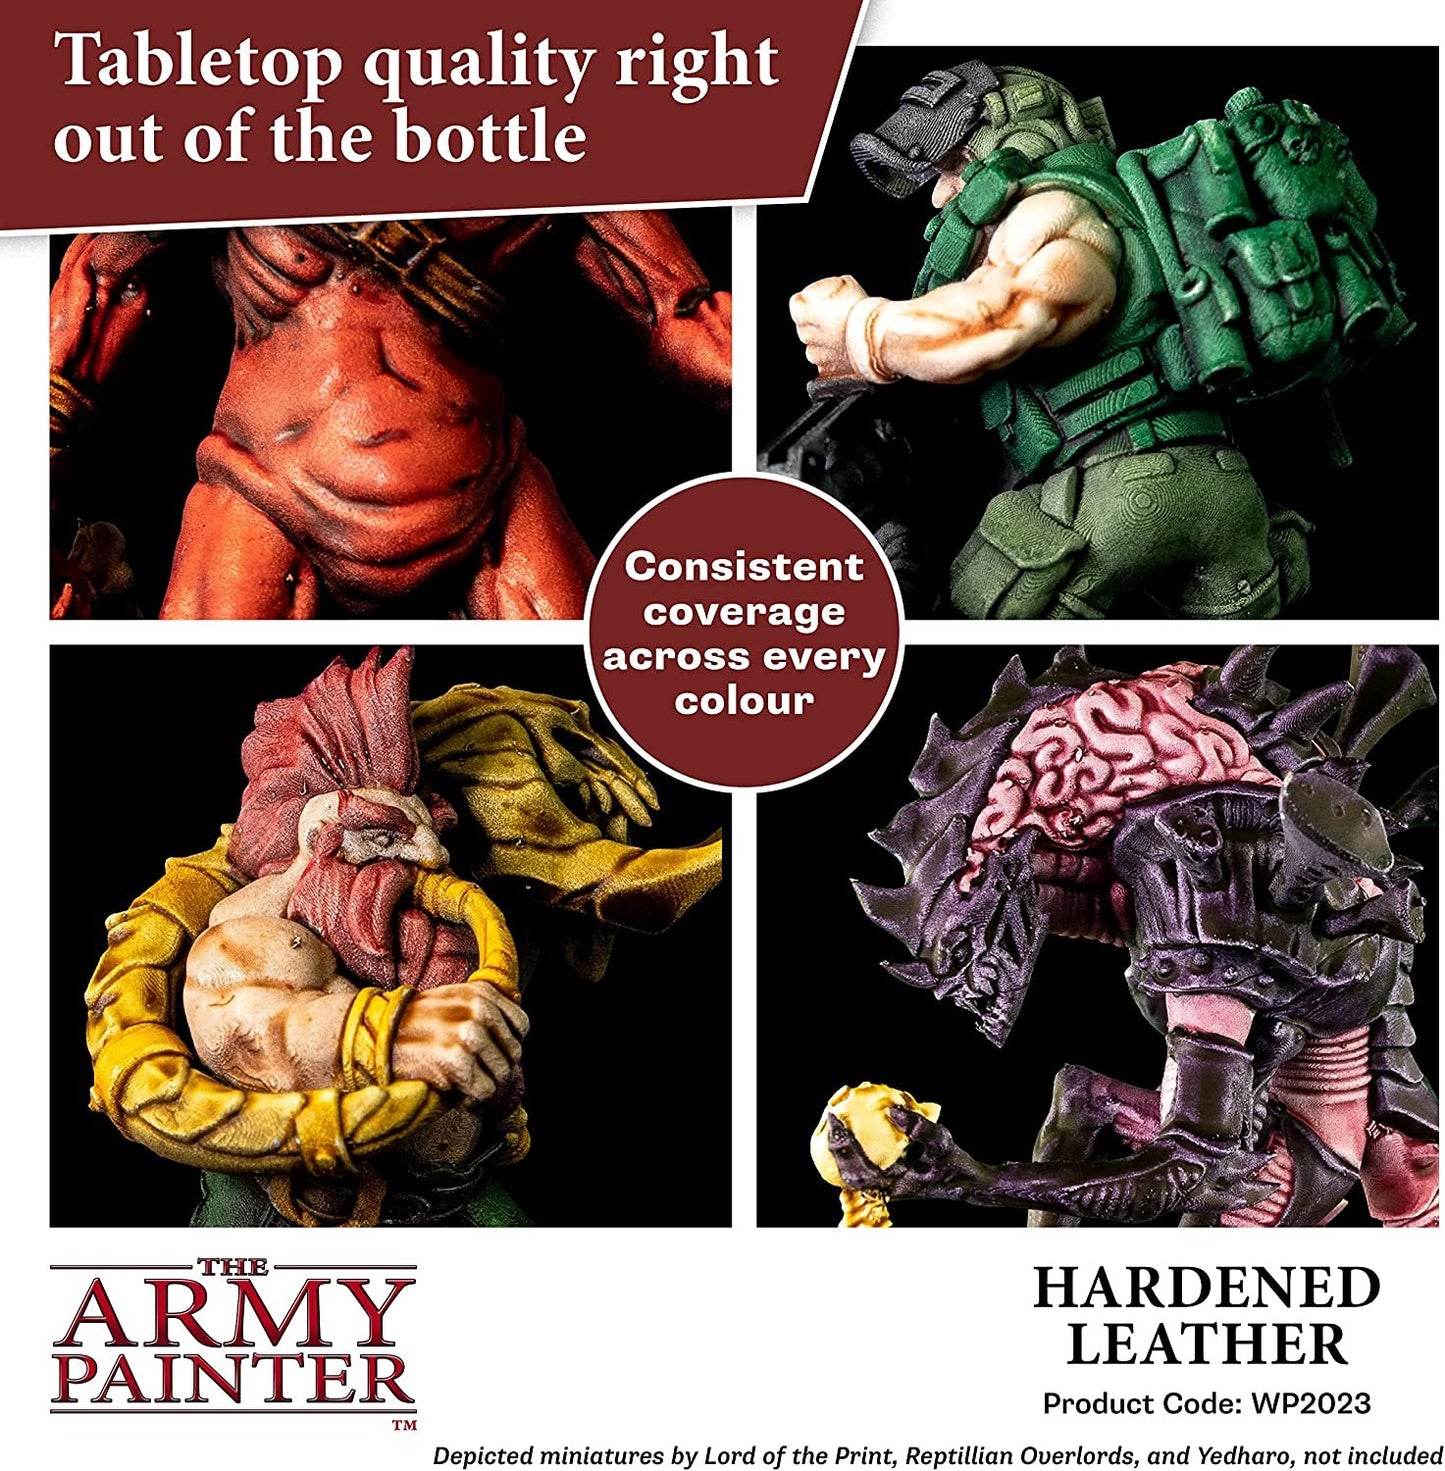 The Army Painter - Speedpaints:  Hardened Leather (18ml/0.6oz)